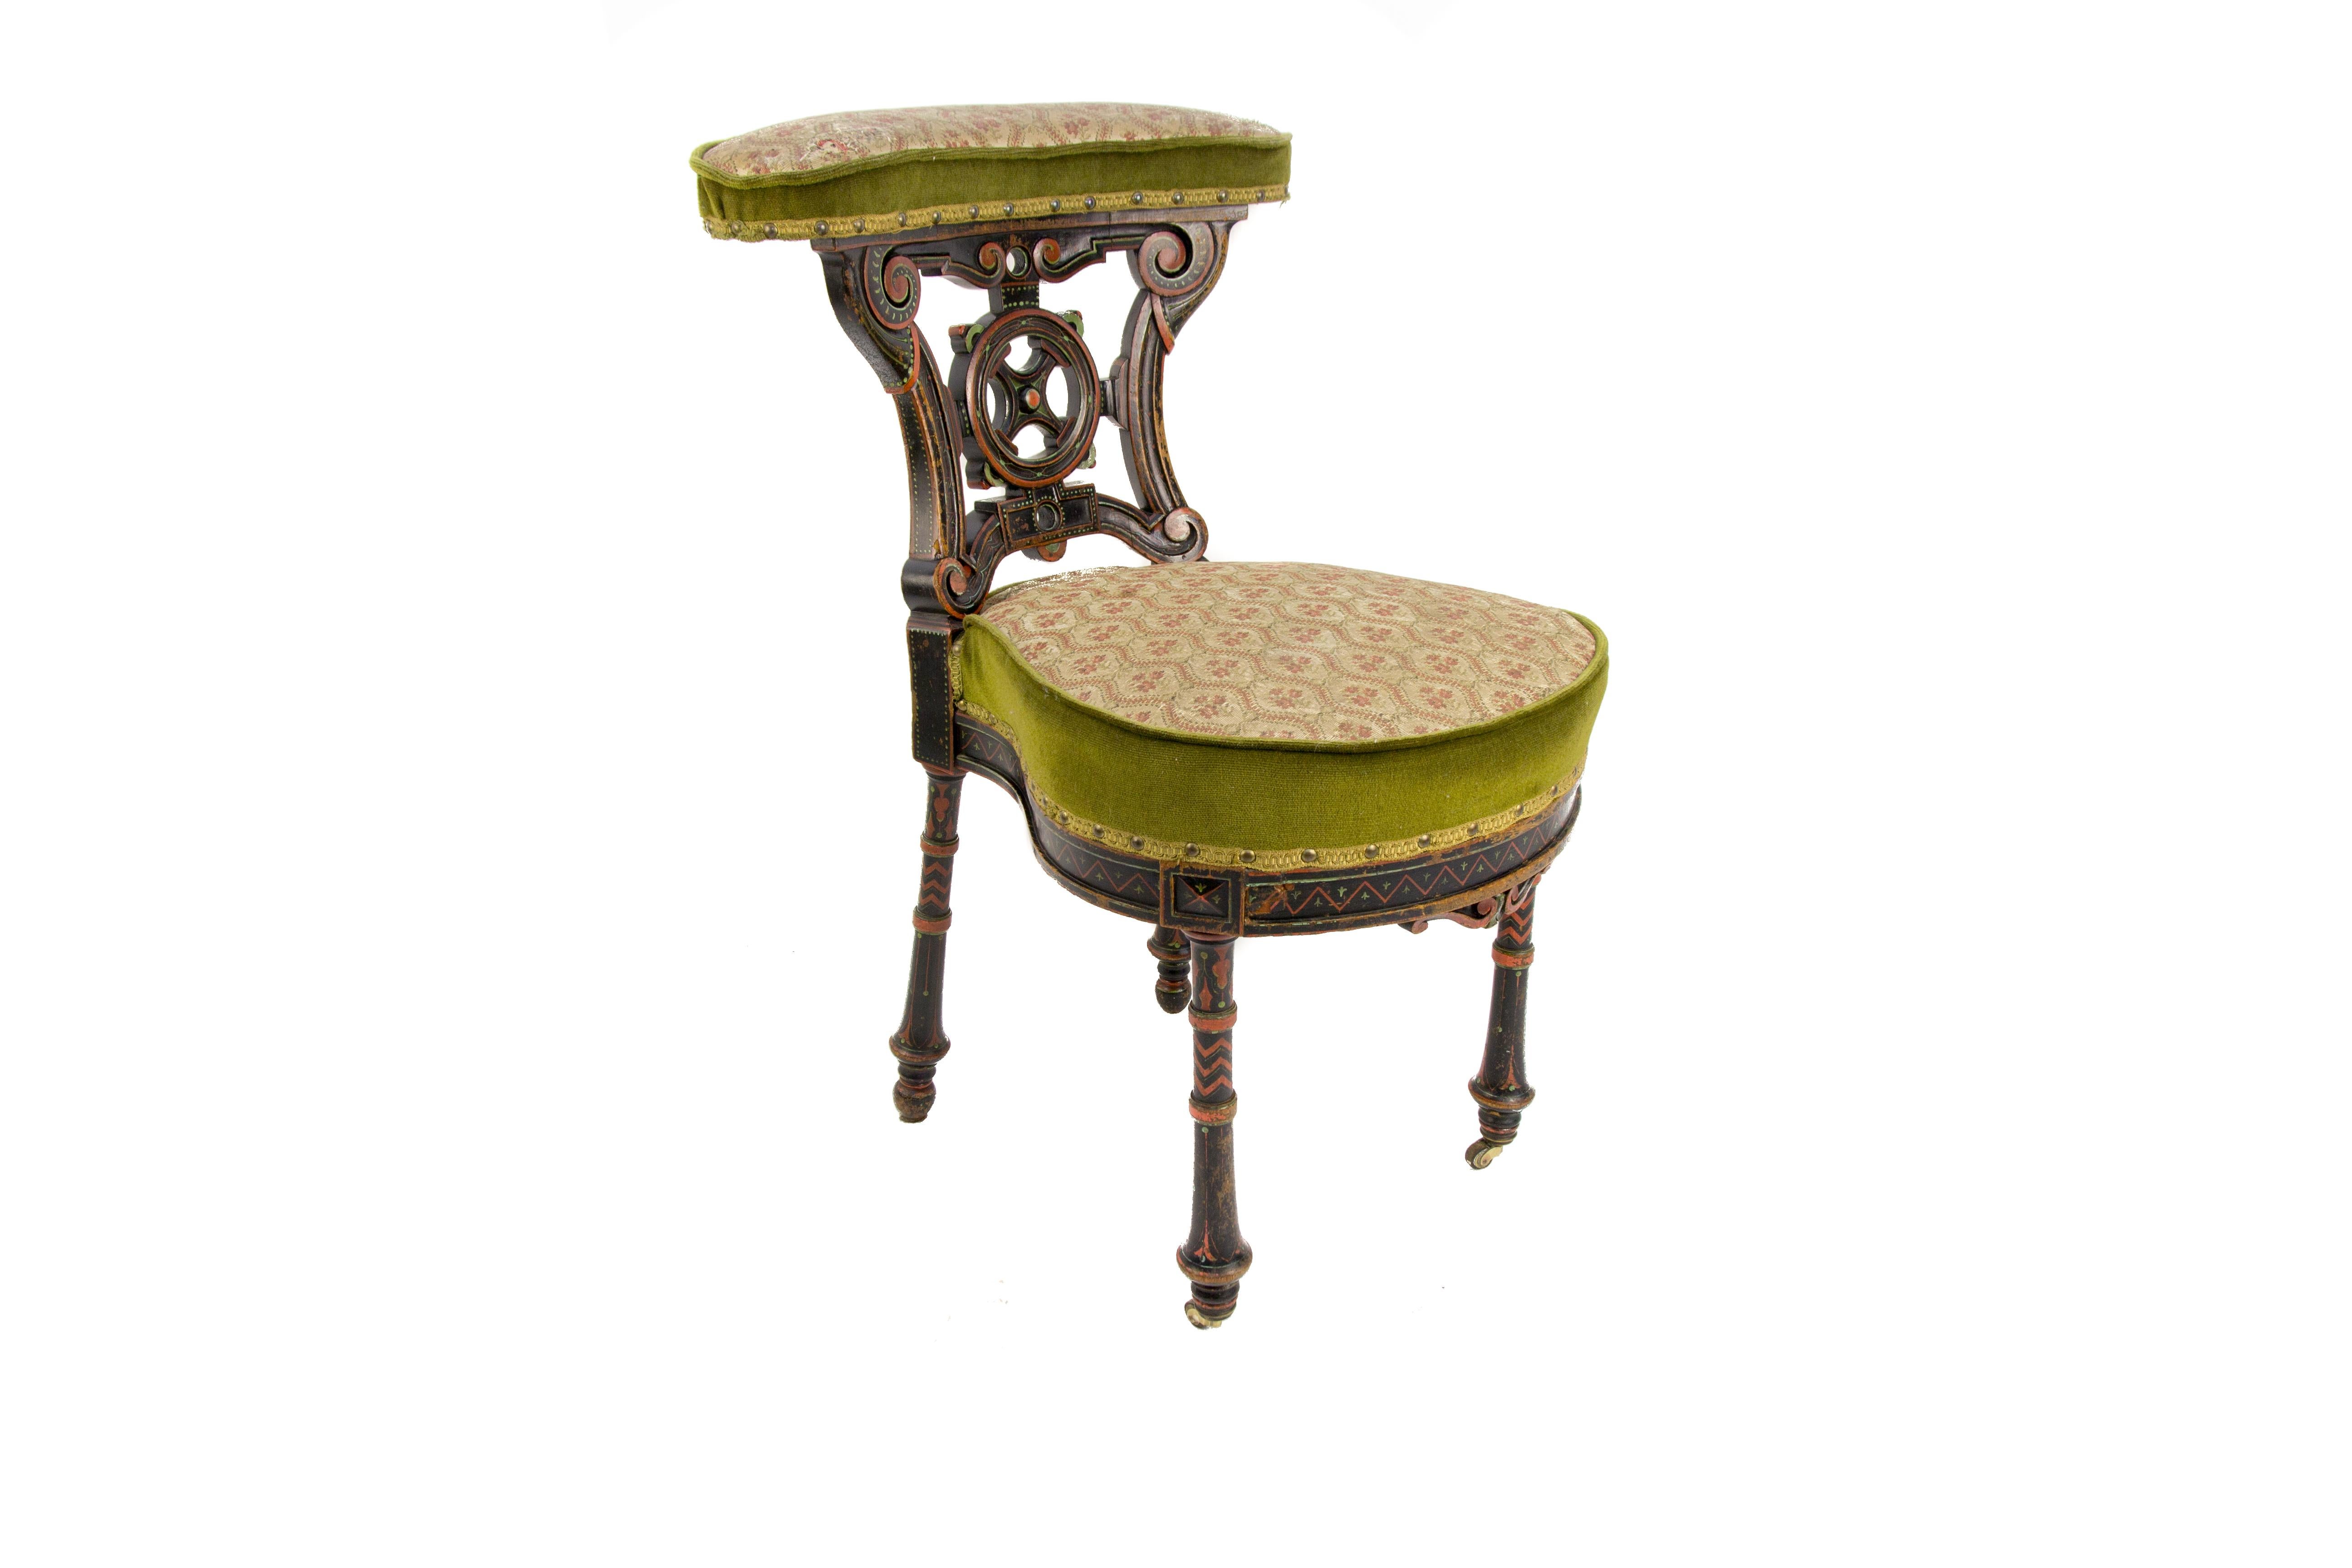 A very decorative, hand-carved and painted French chair, smoking chair, called in France 